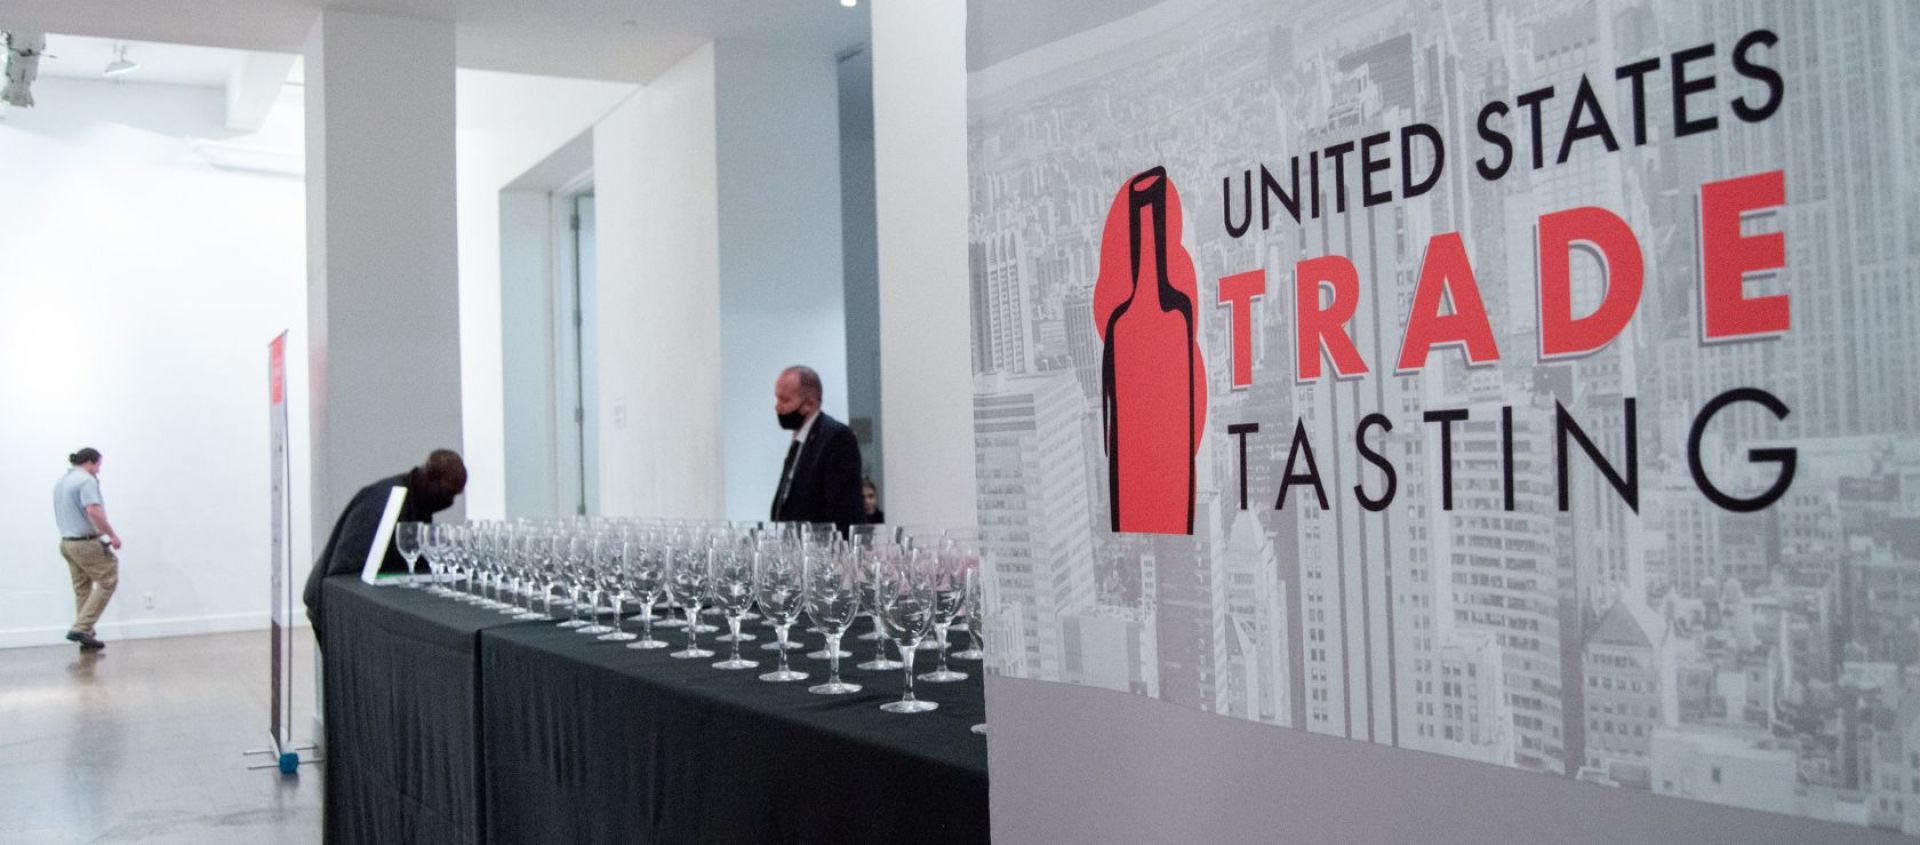 Photo for: The 6th Annual USA Trade Tasting is Here!